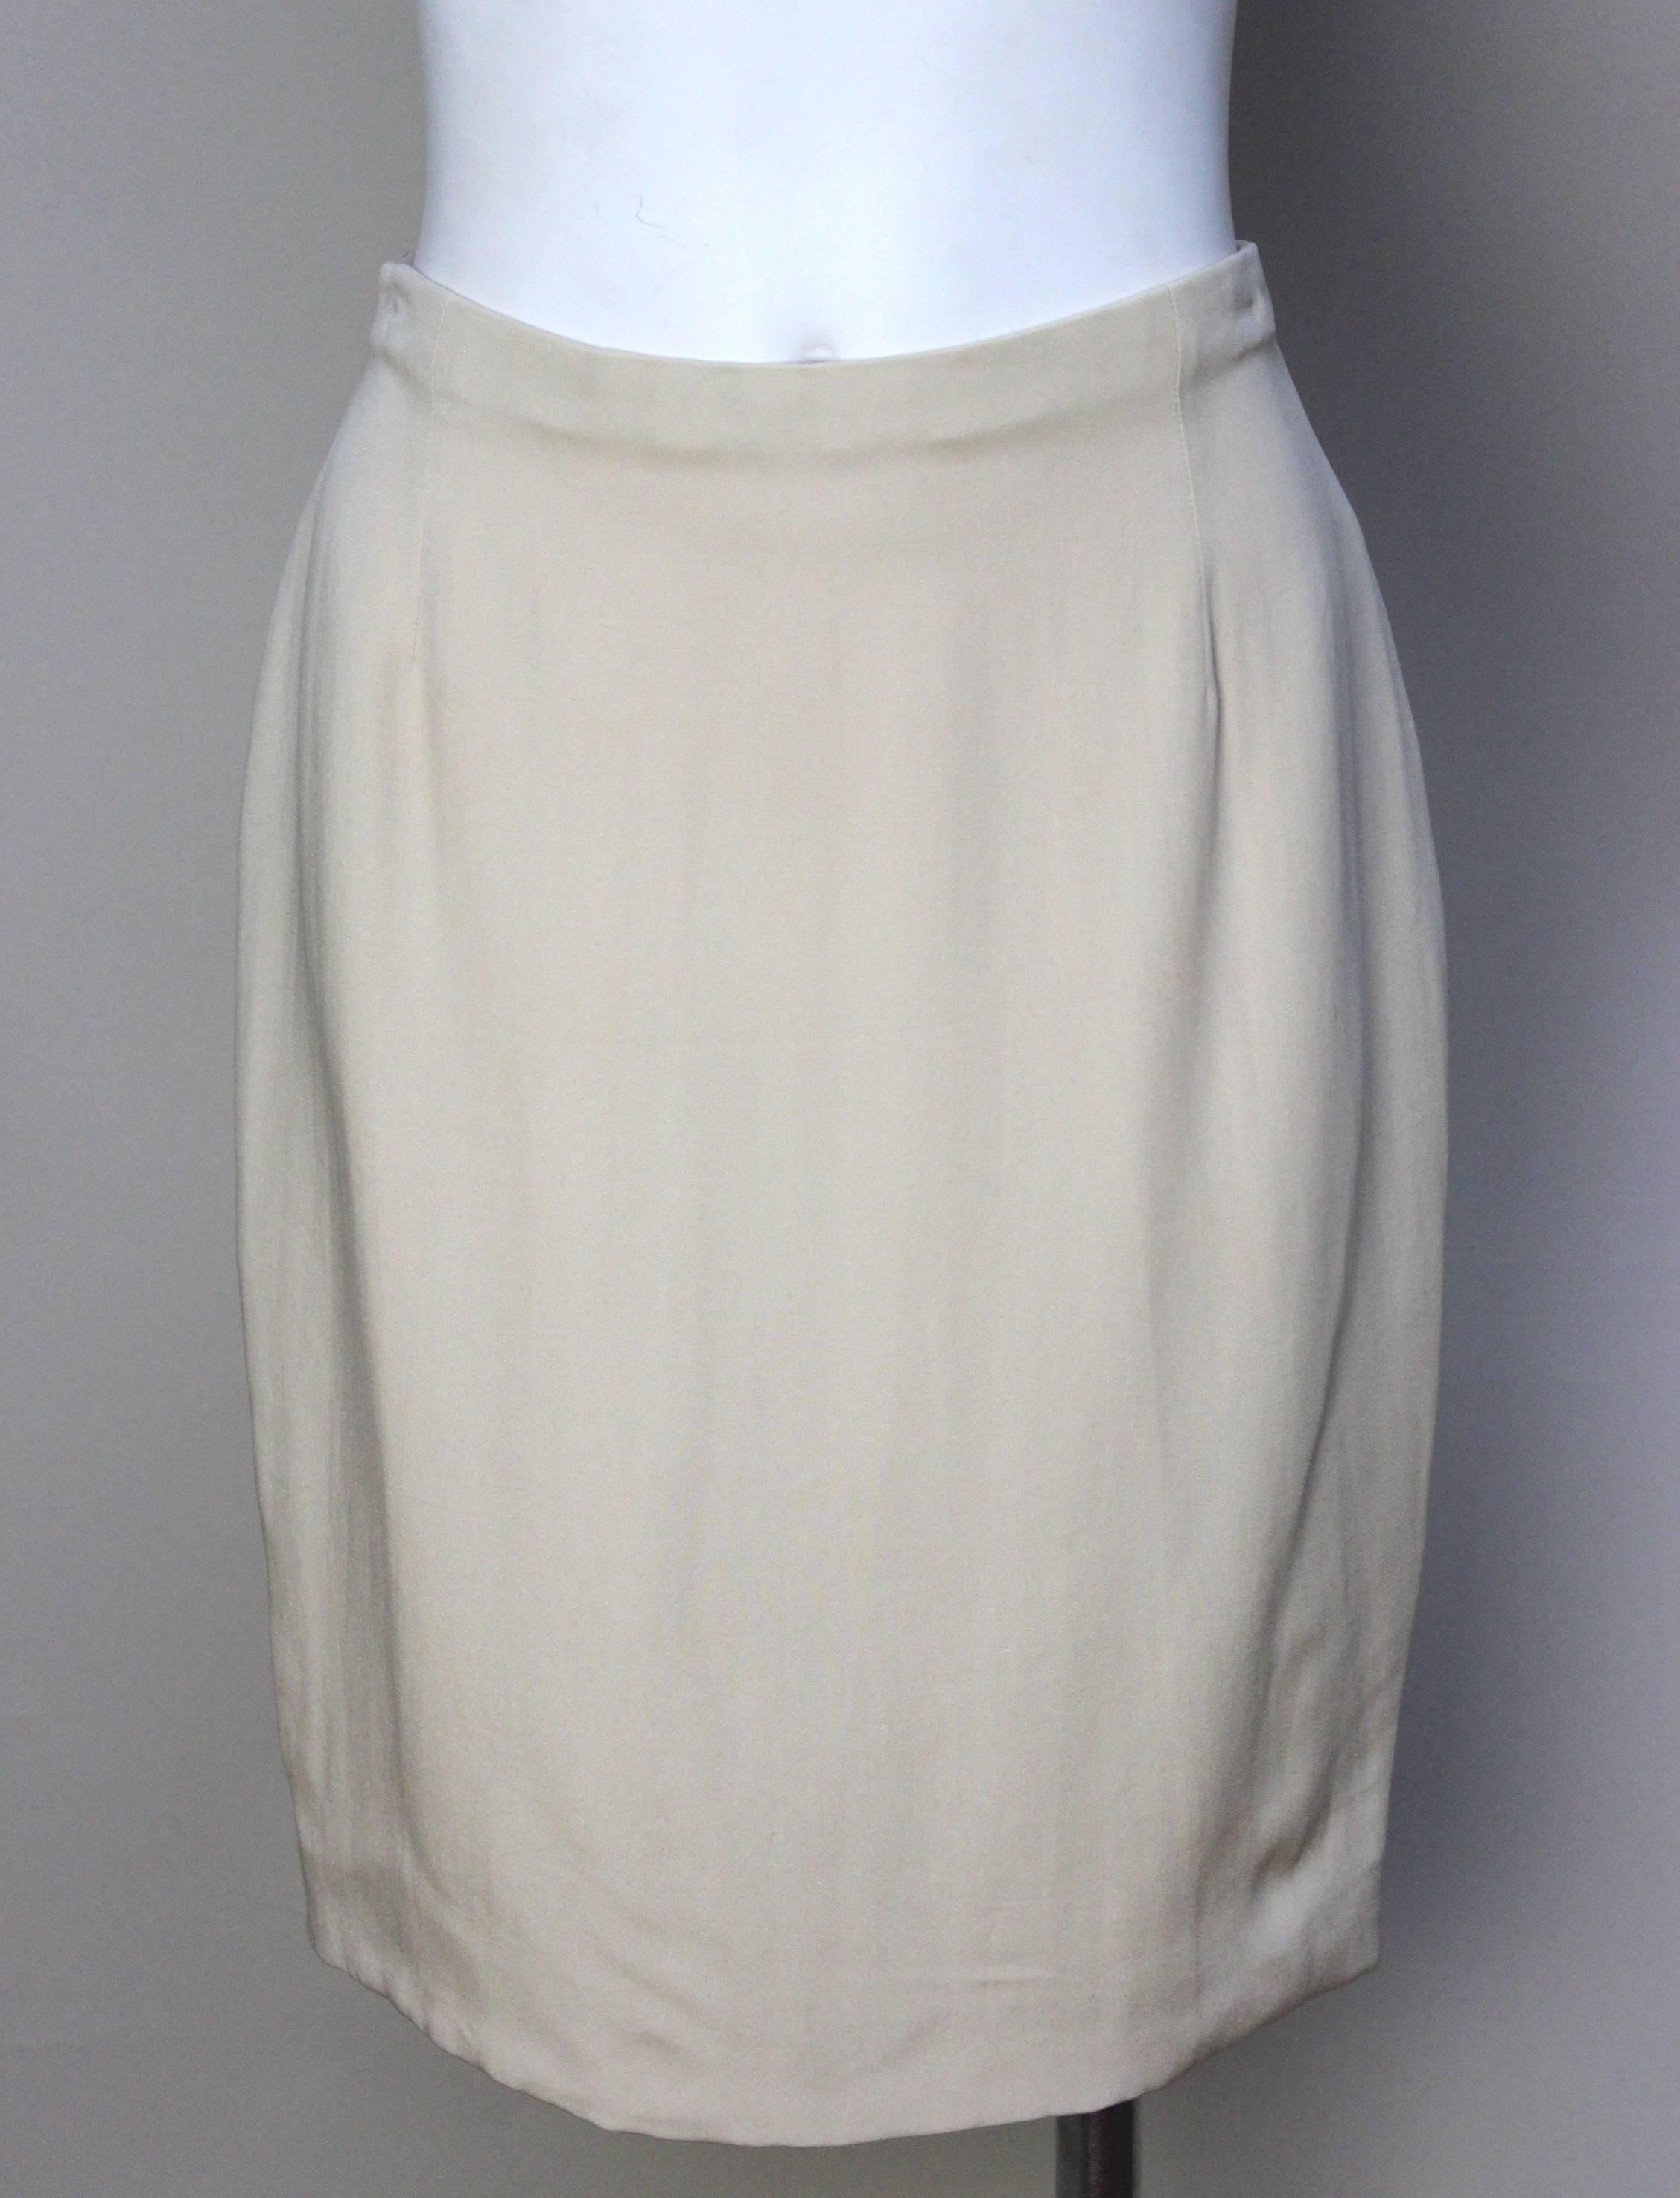 This beautiful light champagne colored silk skirt is a great addition to any wardrobe. The light 100% silk material makes it perfect to wear in warmer weather, and it can be easily dressed up with a blazer or worn casually. 